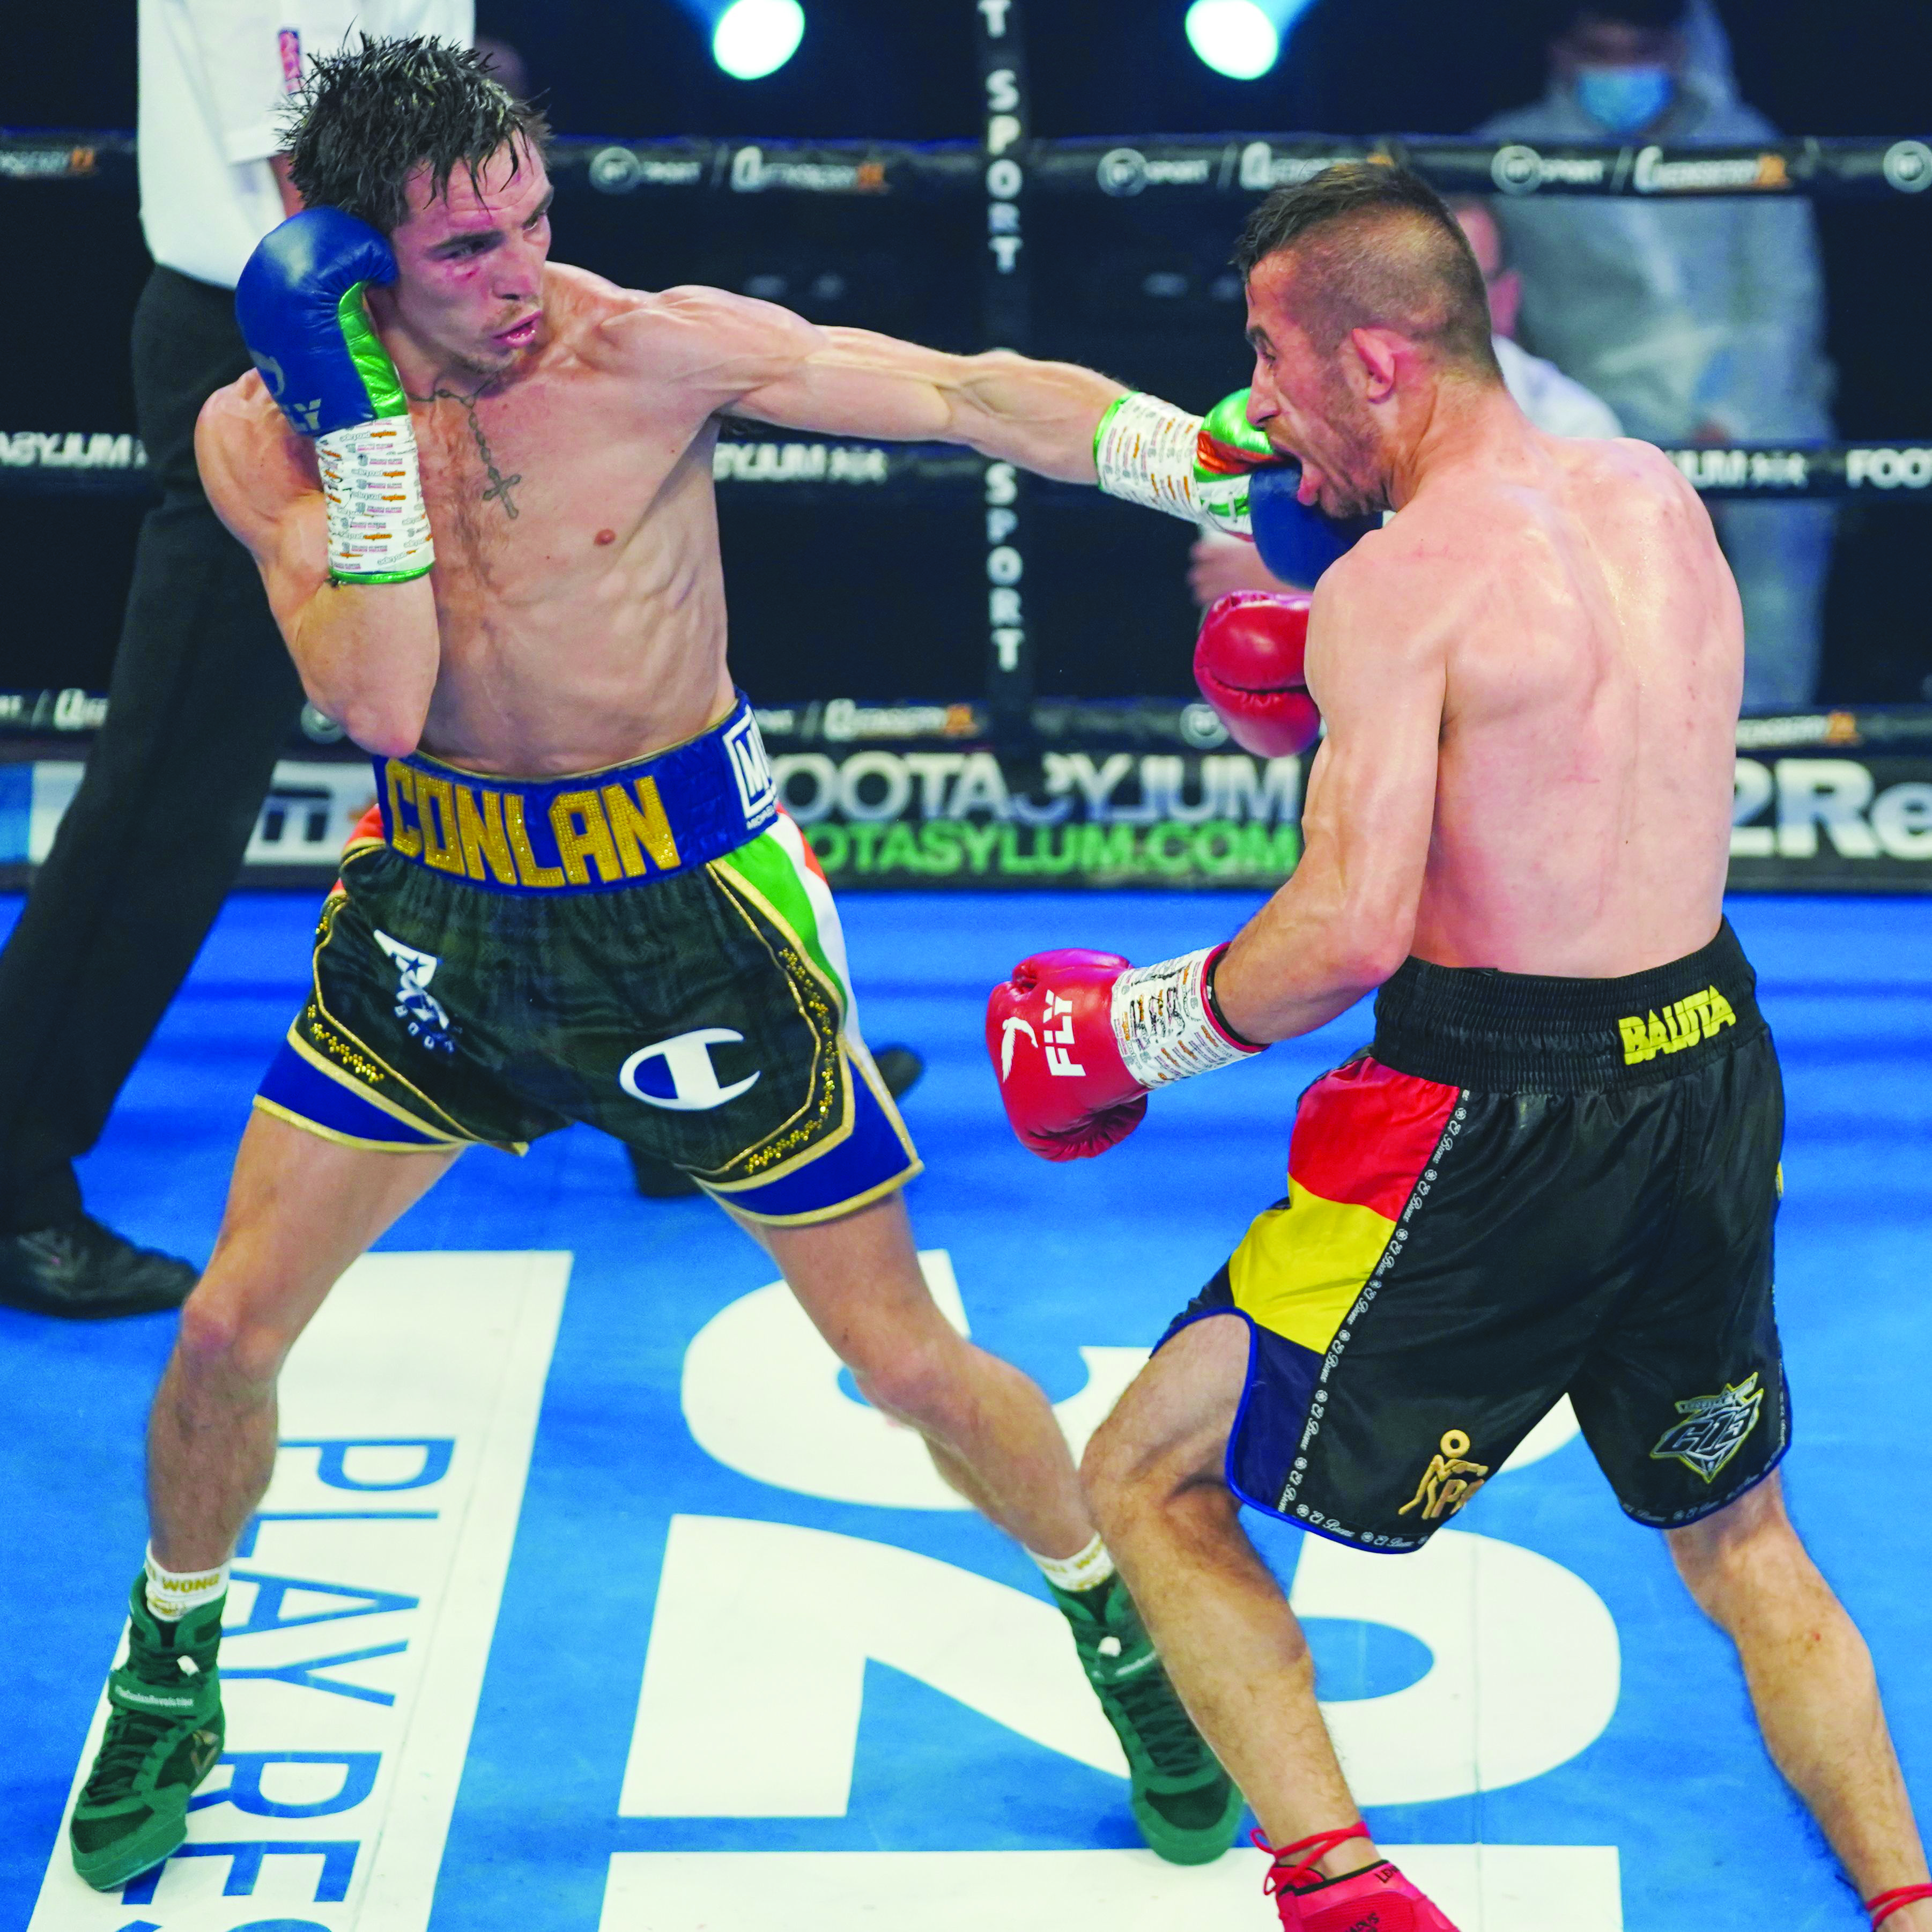 Michael Conlan was given a tough examination against Ionut Baluta last time out with the Romanian having scored a previous victory over Friday’s opponent, TJ Doheny, last year